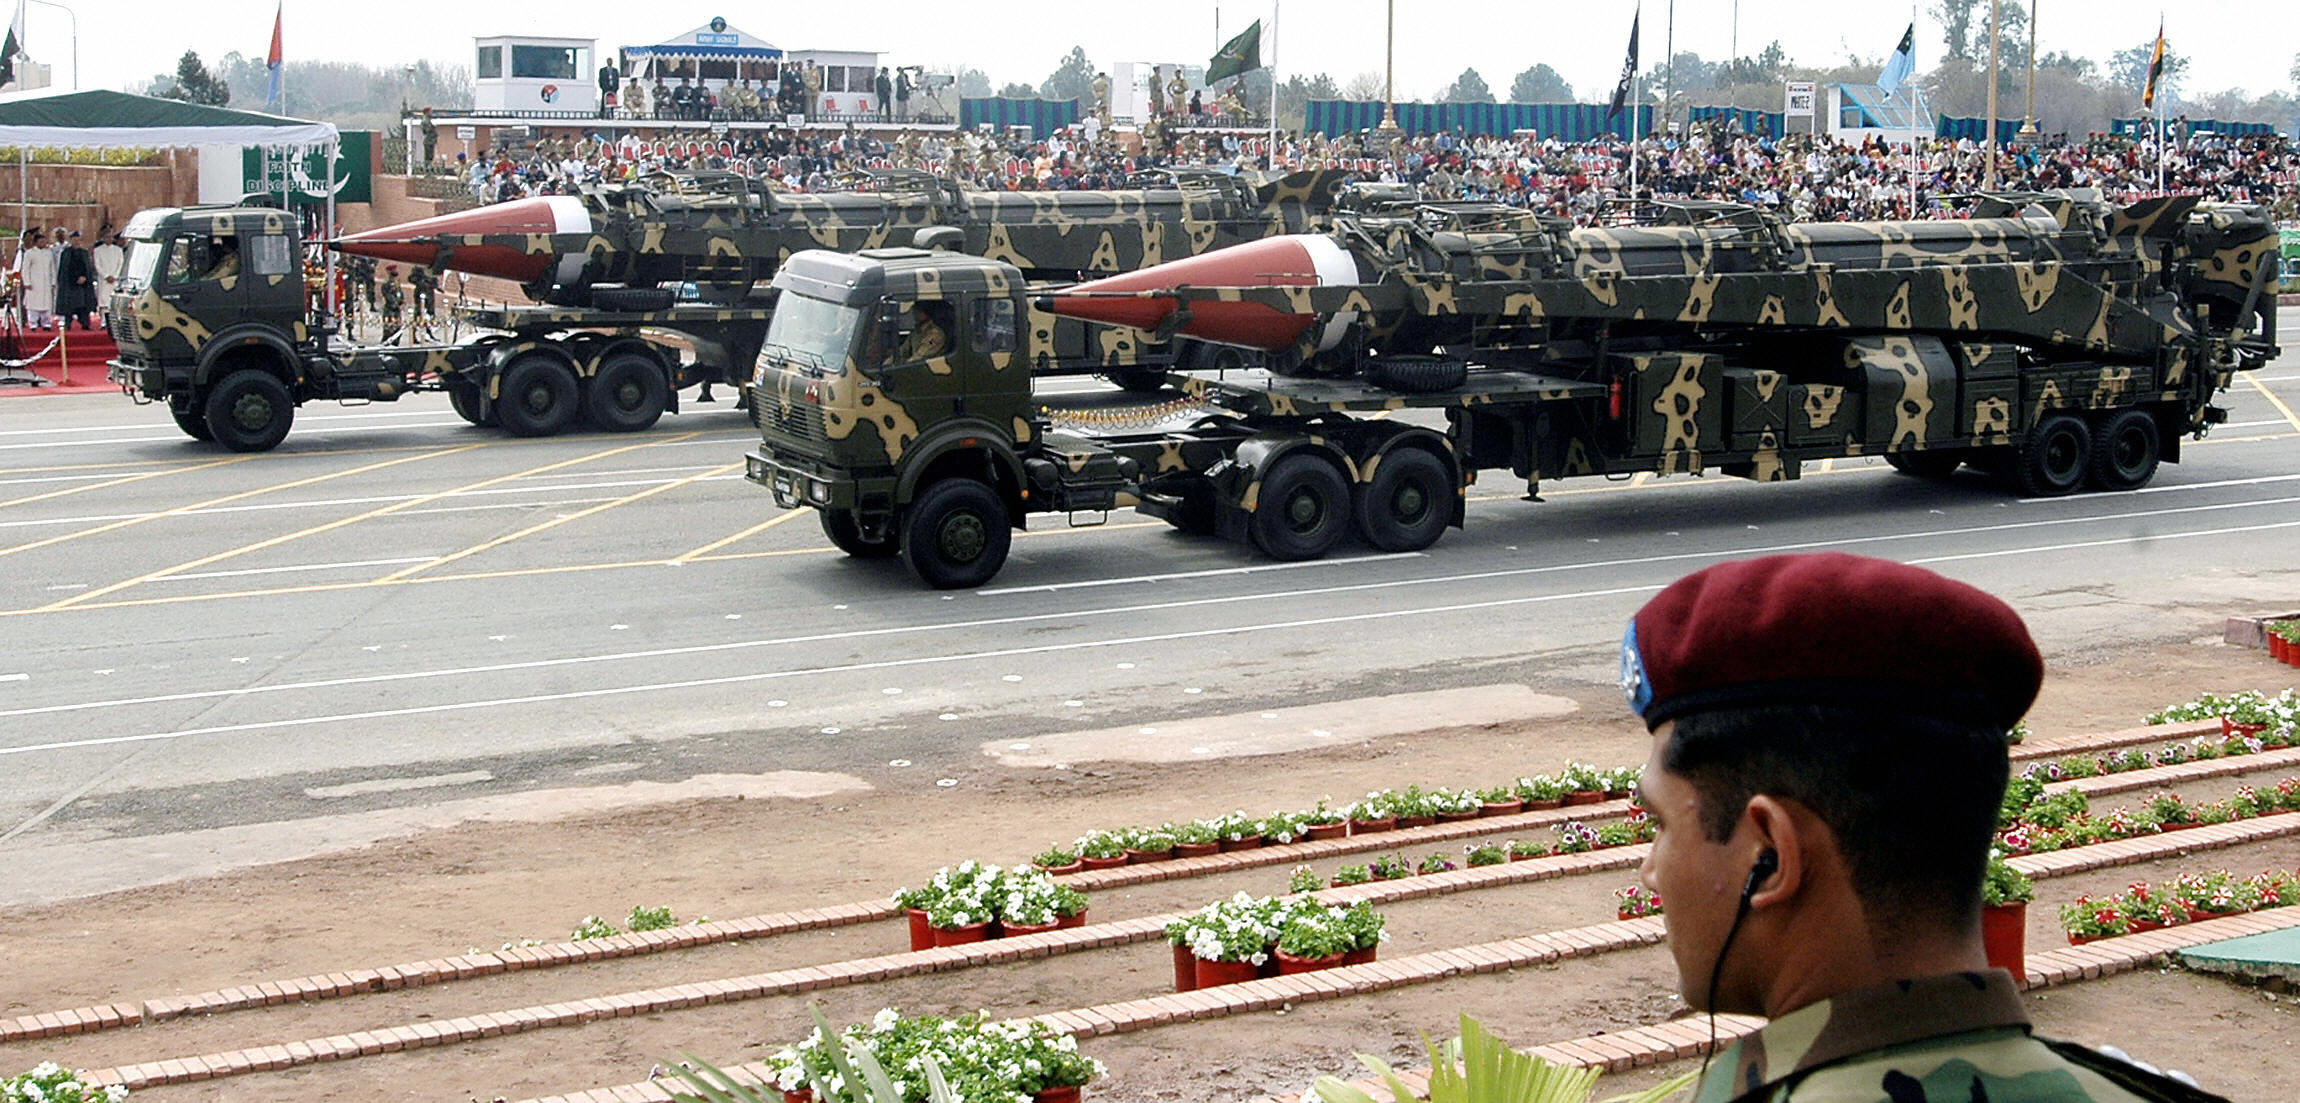 A Pakistani commando (R) looks on as Ghauri intermediate-range missiles capable of carrying nuclear warhead are transported on launchers during the National Day parade in Islamabad, 23 March 2005. (FAROOQ NAEEM—AFP/Getty Images)